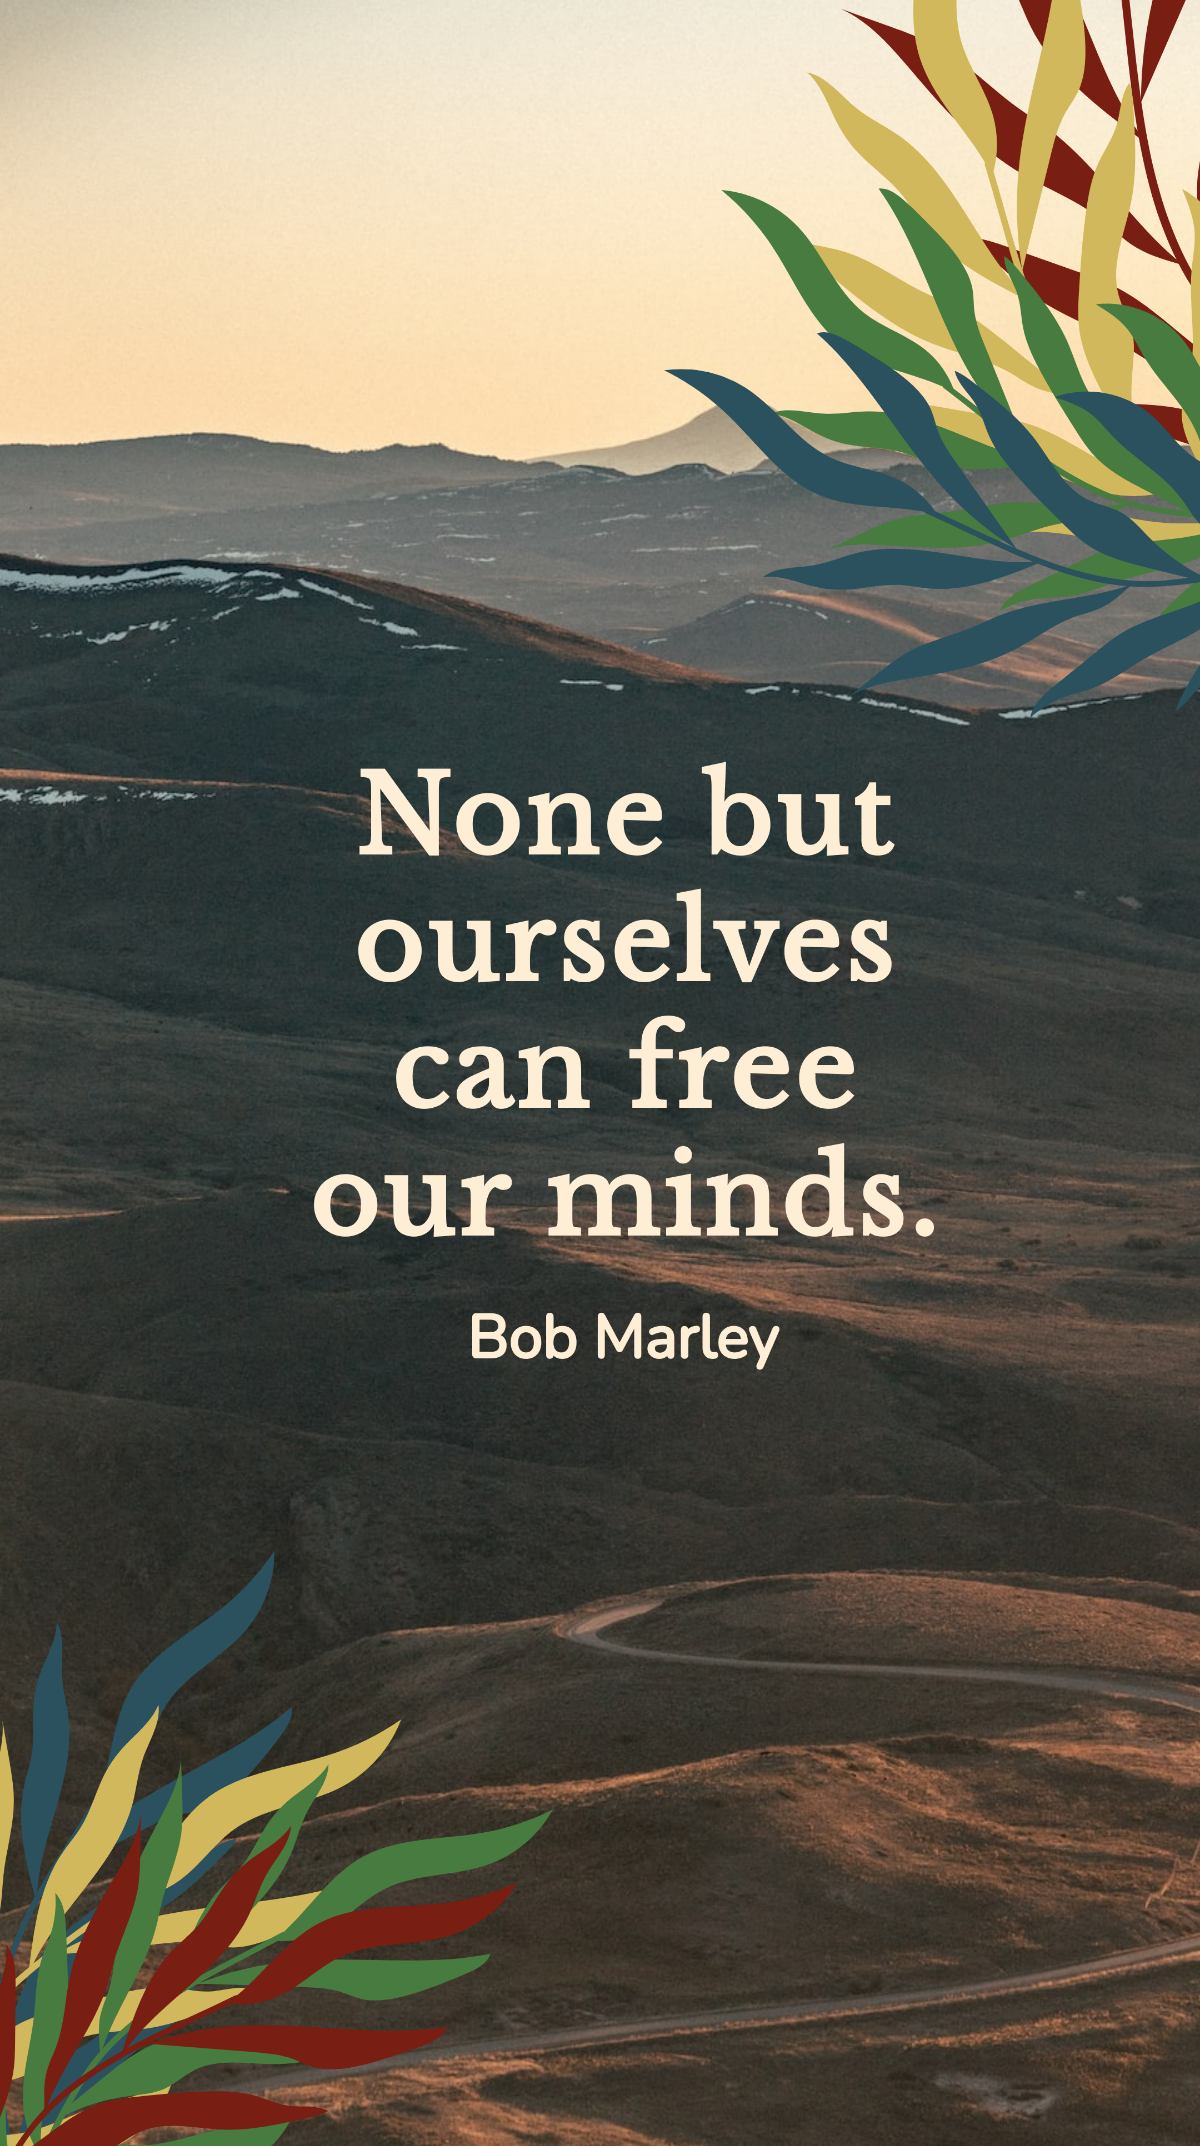 Bob Marley - None but ourselves can our minds.